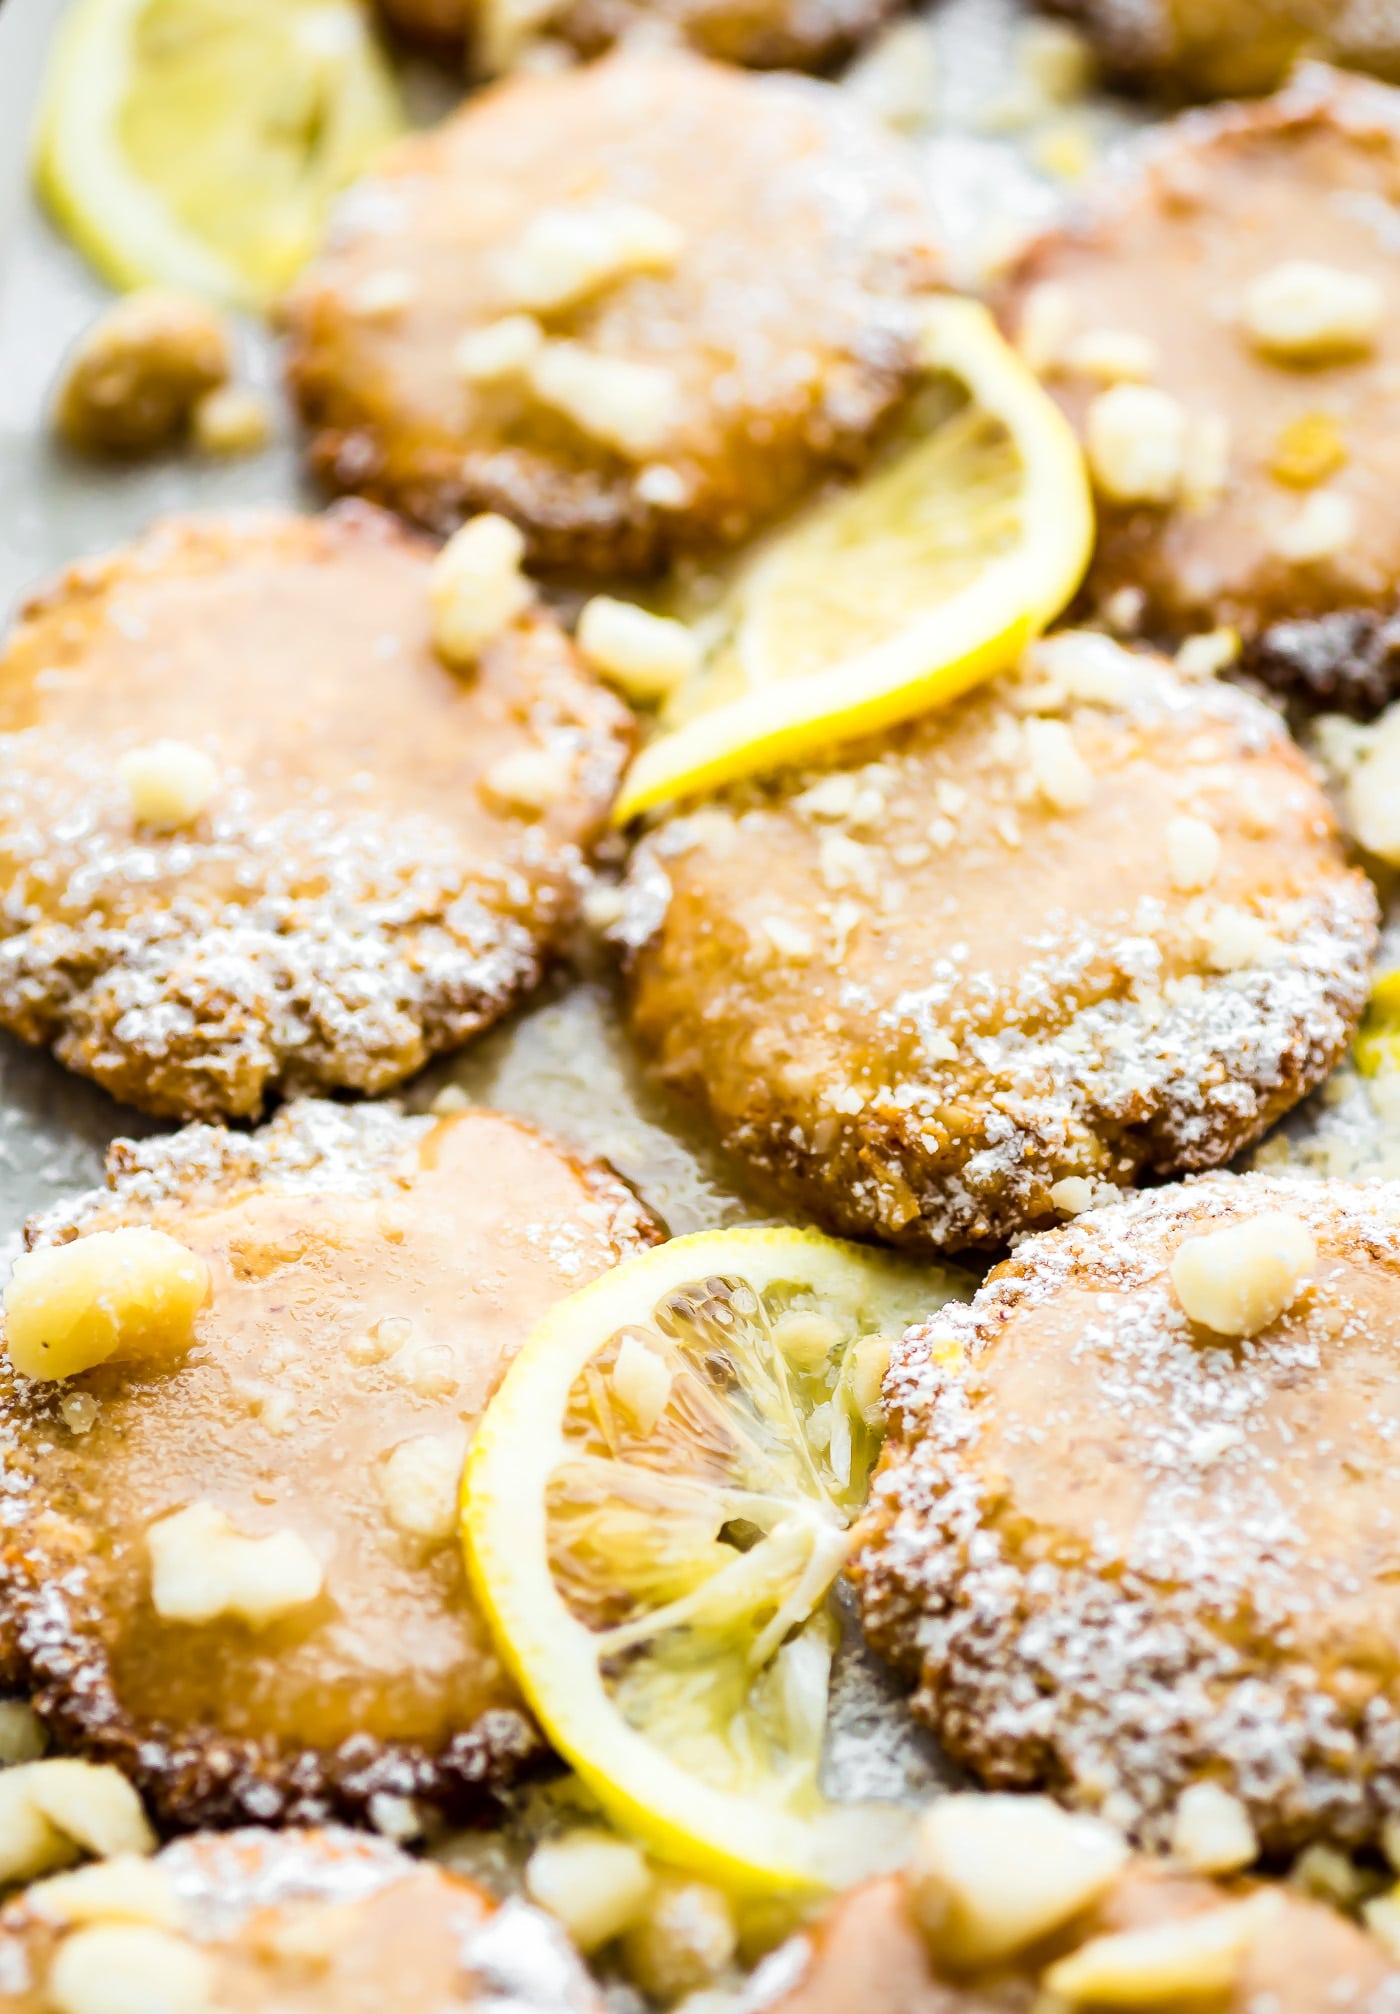 platter of macadamia nut cookies with lemon glaze surrounded by fresh lemon slices